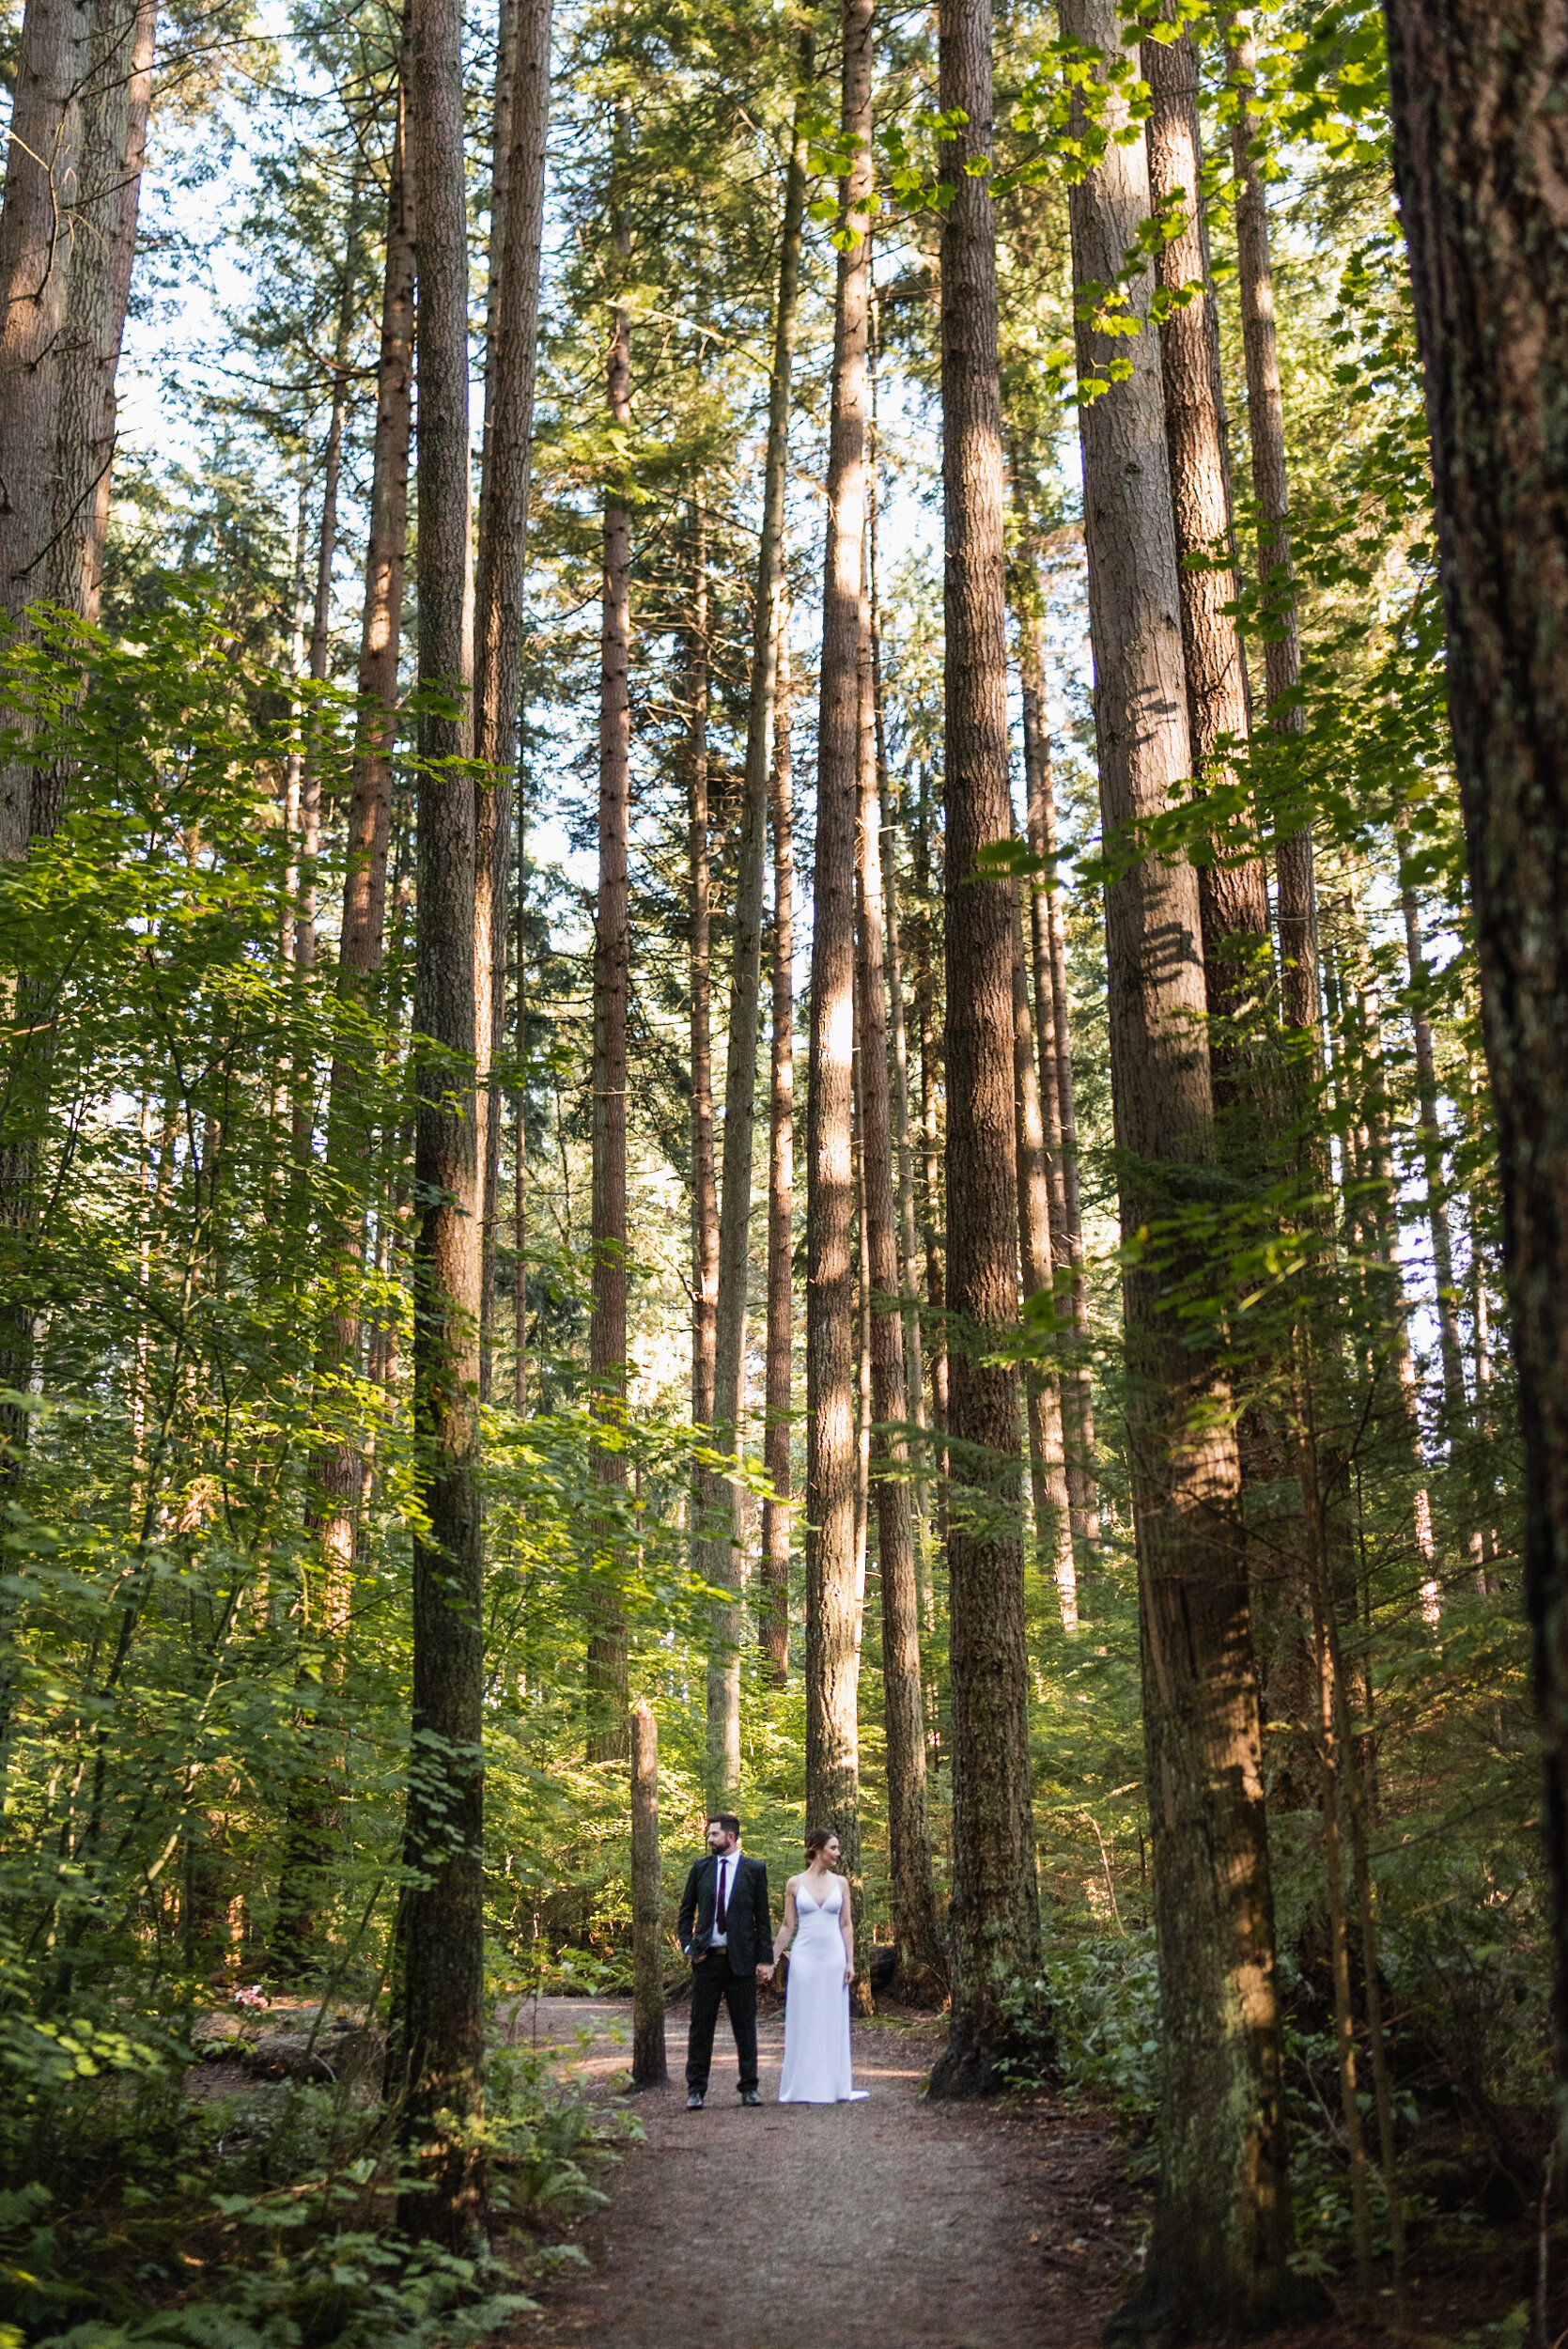 Couple stands in forest tall trees